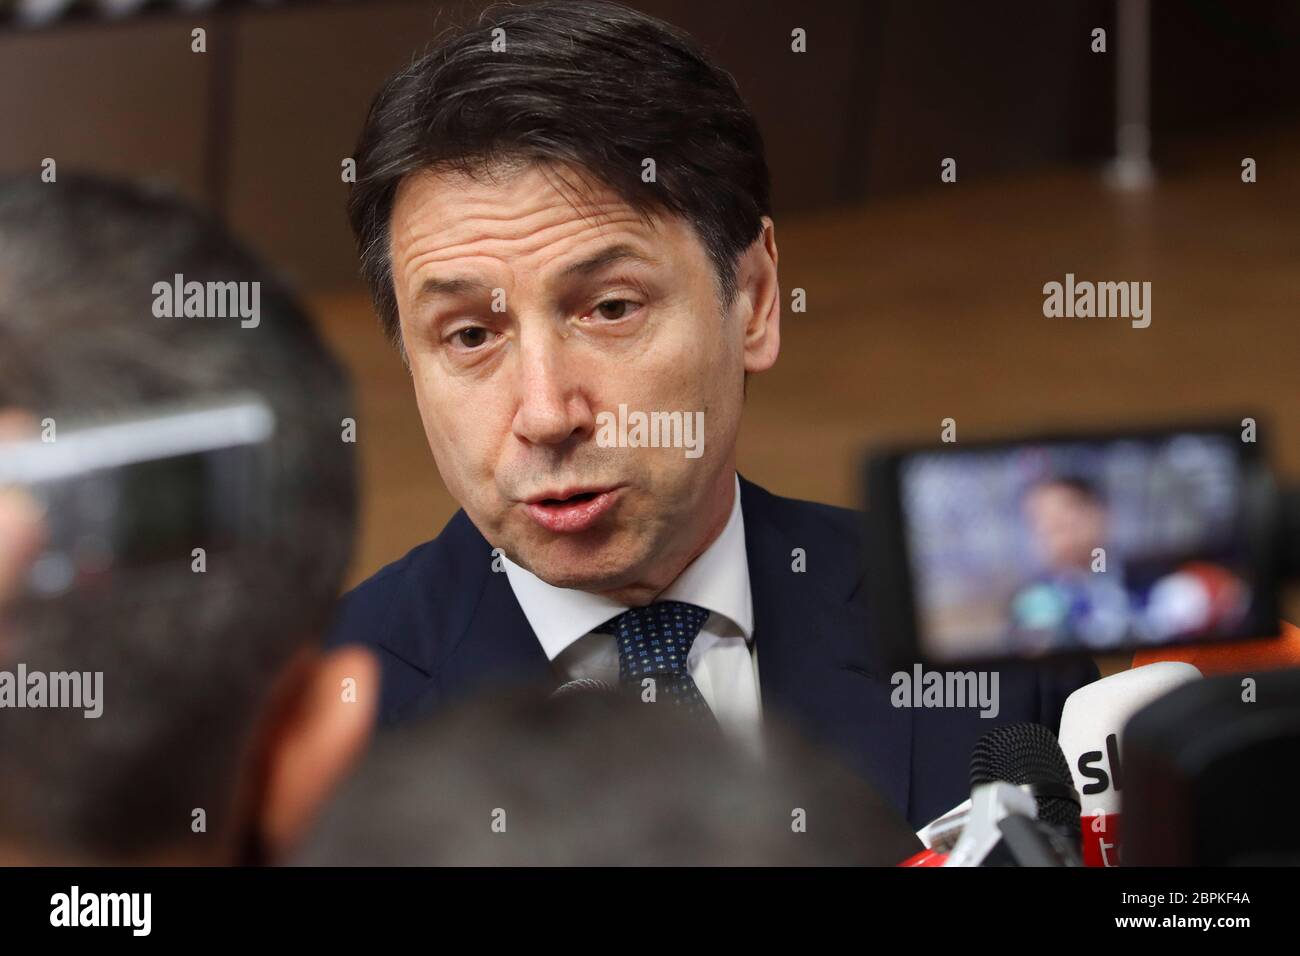 Giuseppe Conte, Prime Minister of Italy talking to the media, a doorstep press statement at the European Council Summit, EU leaders meeting. Stock Photo